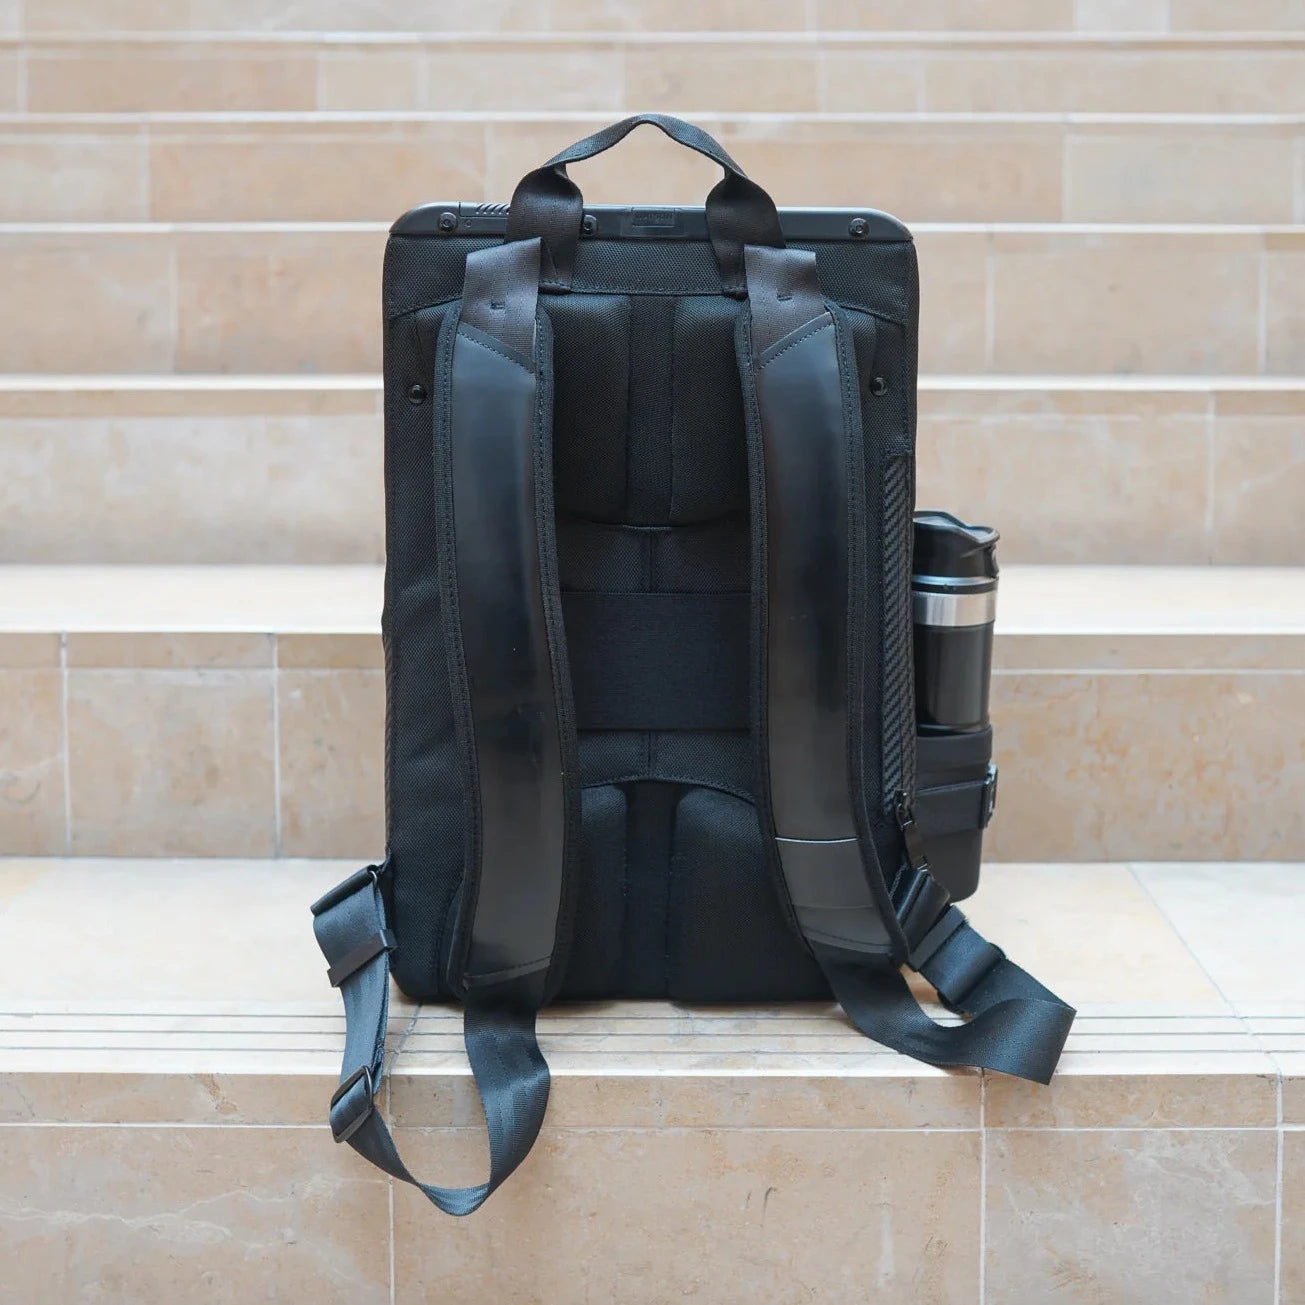 watson pack 3.0 work and travel backpack